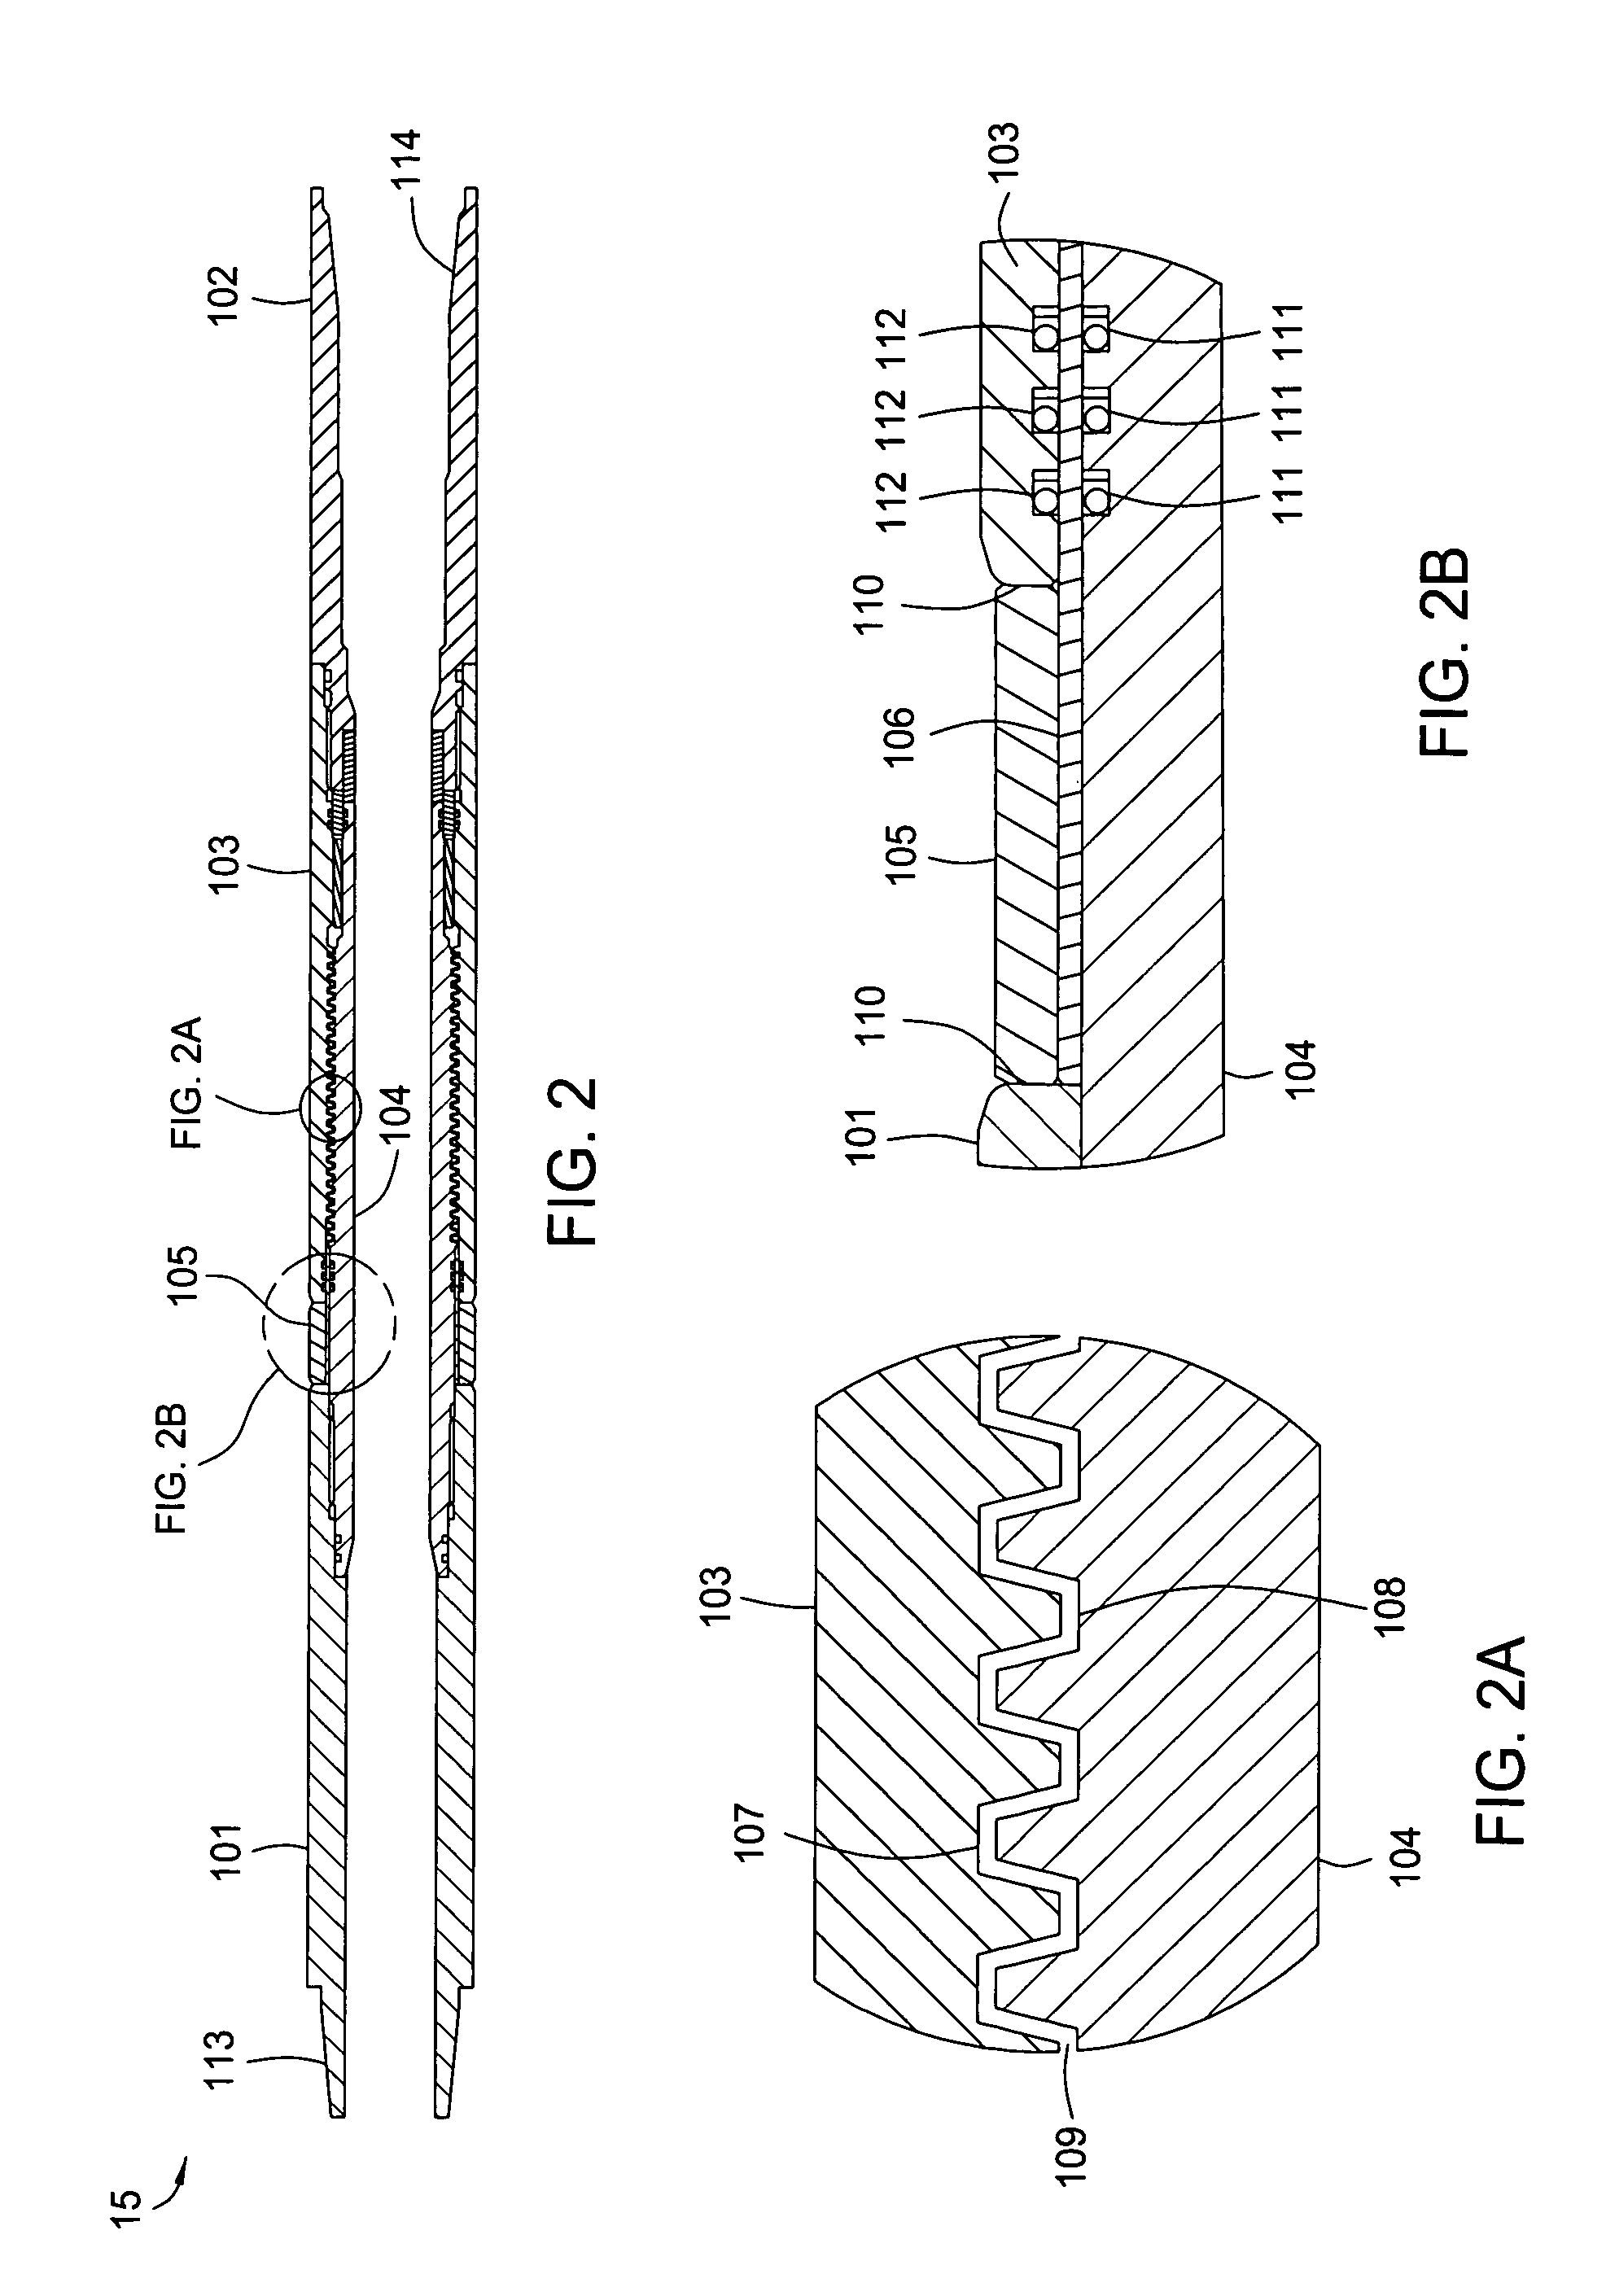 Electromagnetic gap sub assembly